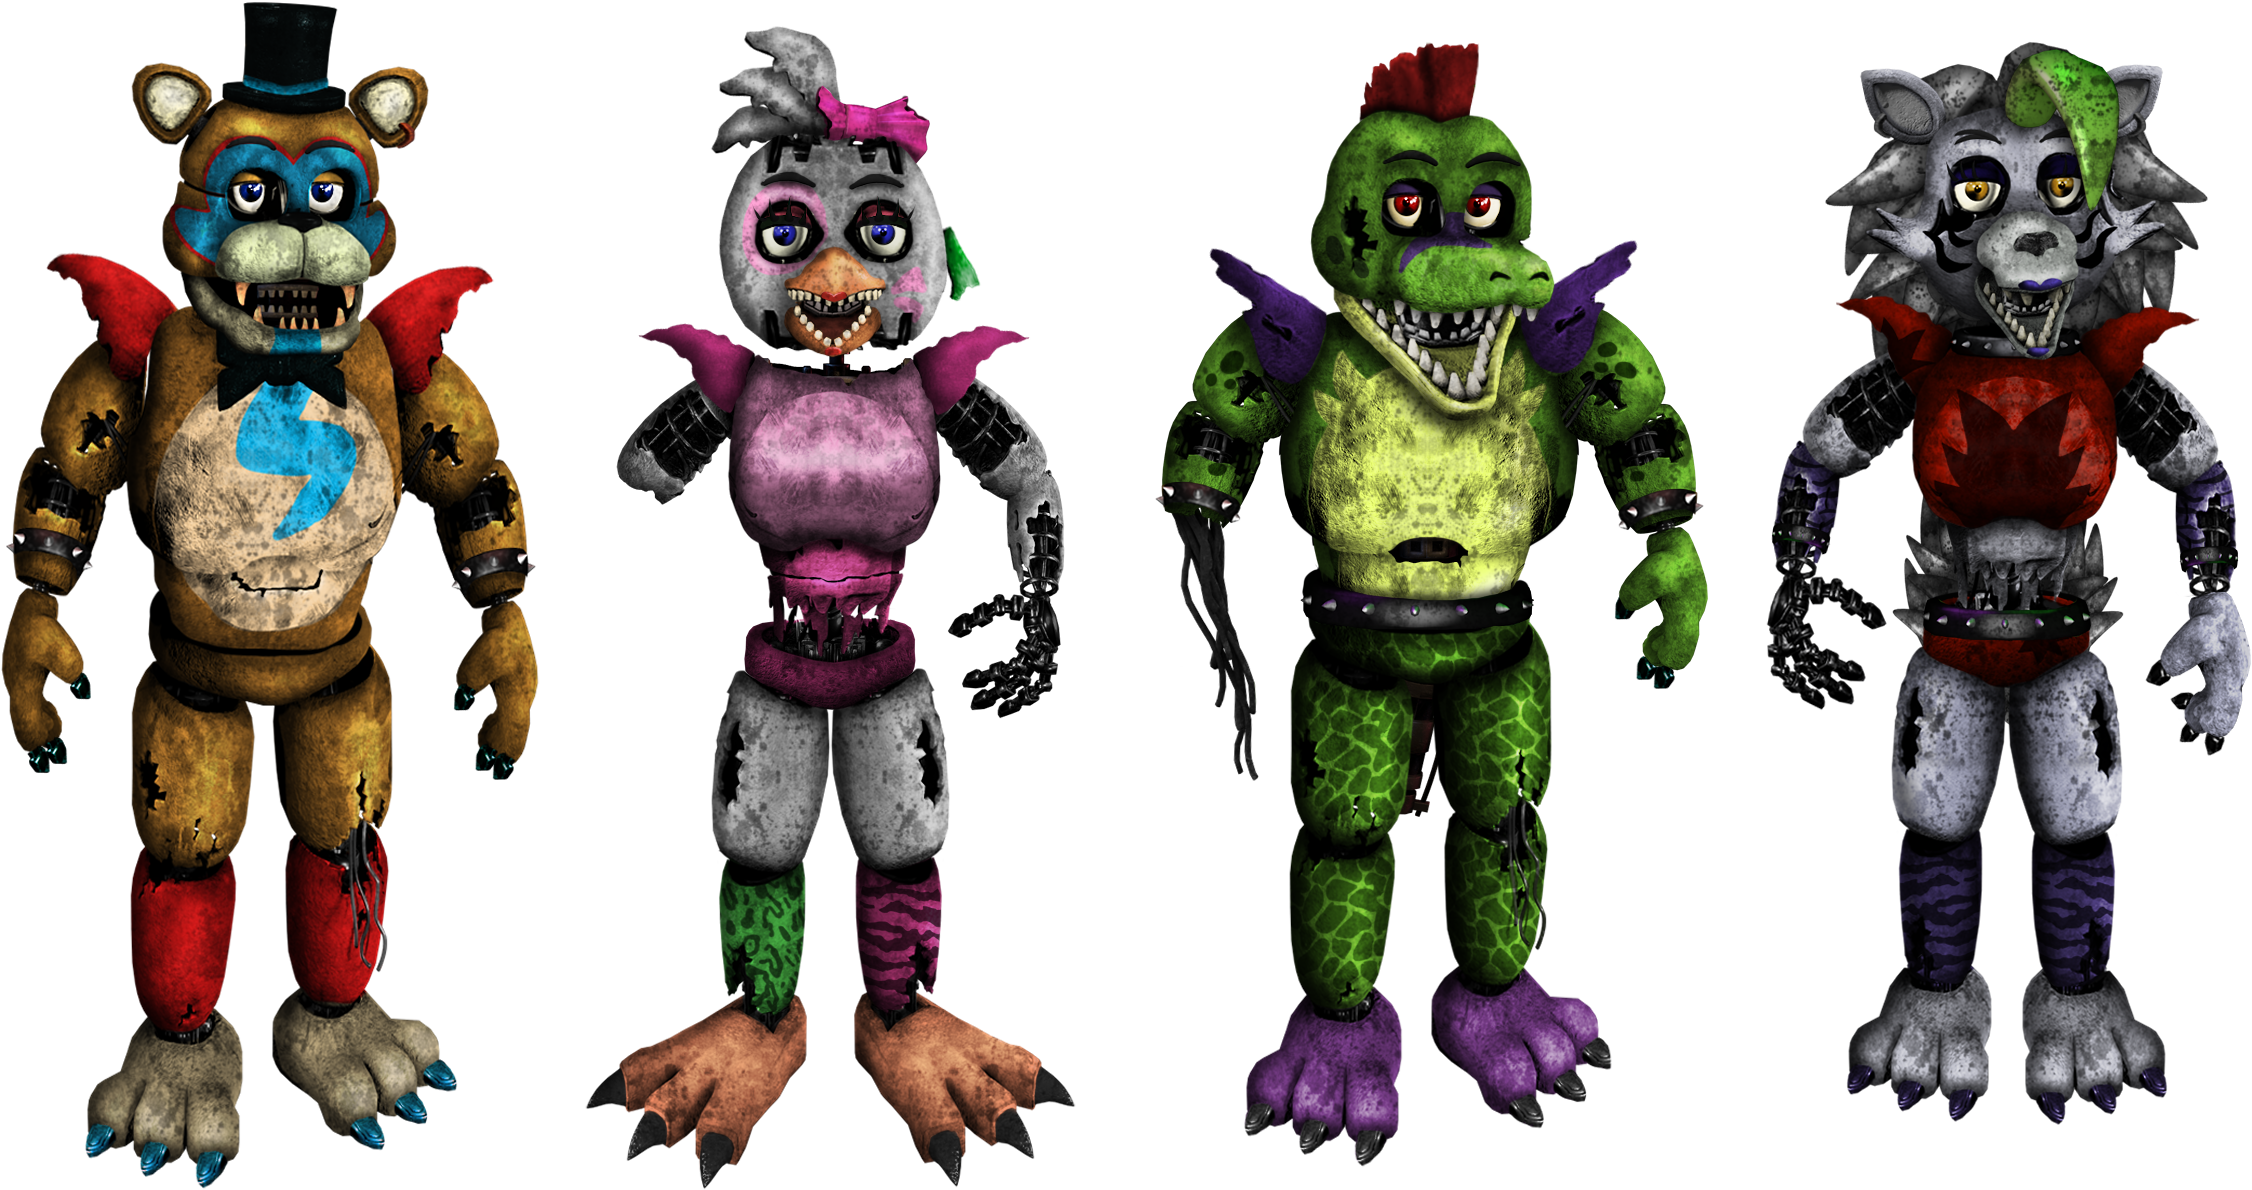 FNAF] Security Breach Characters 2 by 205tob on DeviantArt